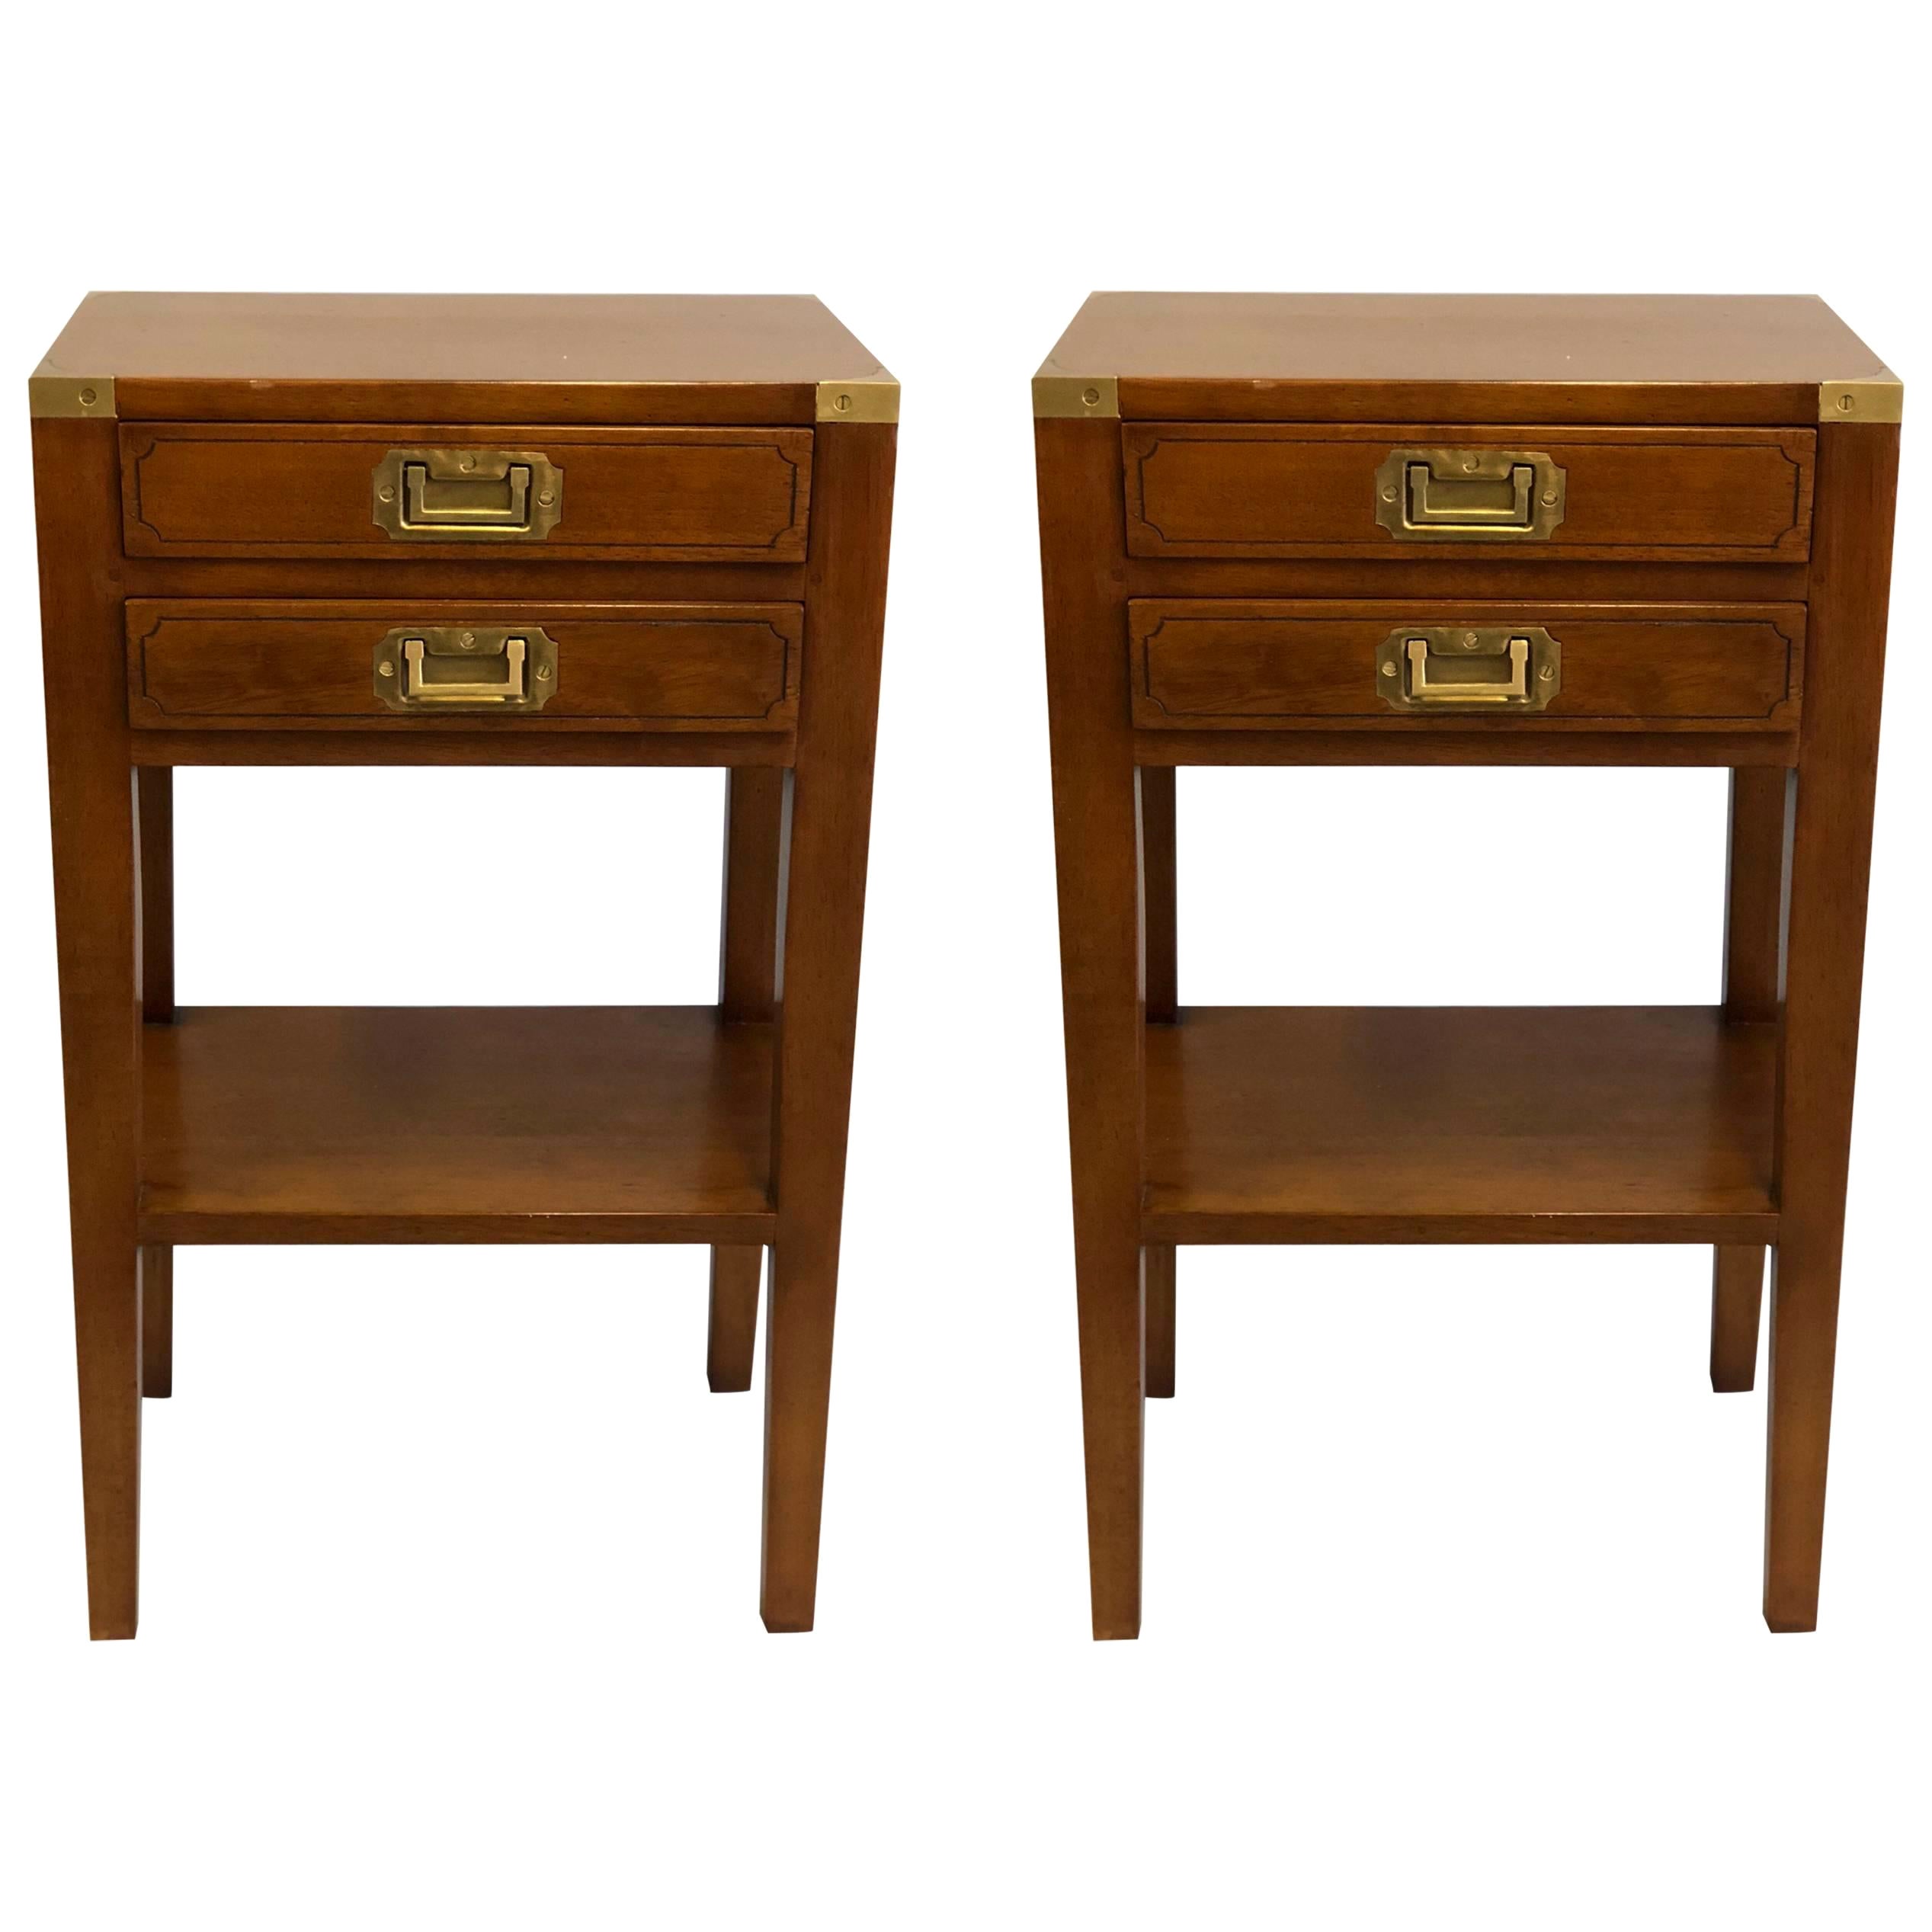 Pair French Mid-Century Modern Style Marine Nightstands / End Tables